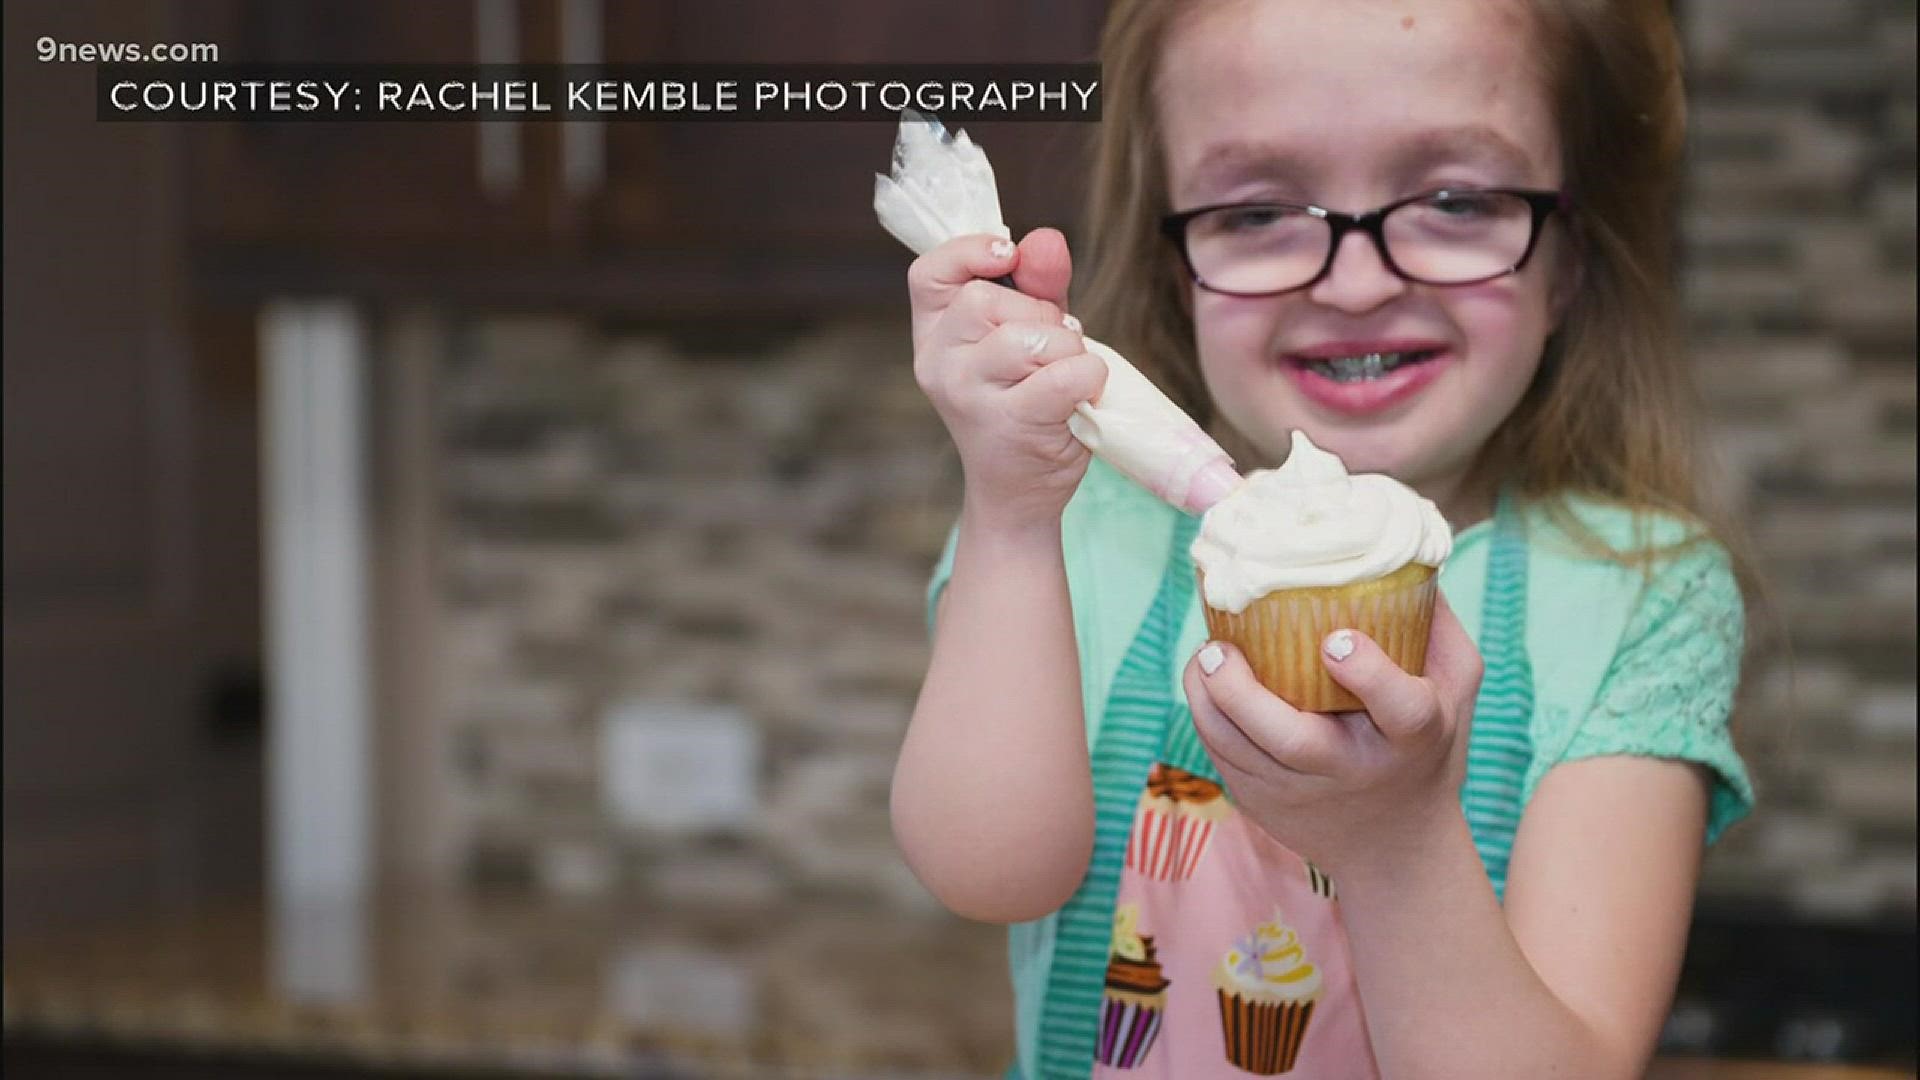 Kaley hoped to raise $50,000 through her cupcakes which she designed that are sold at King Soopers stores for the first 7 days of every month.